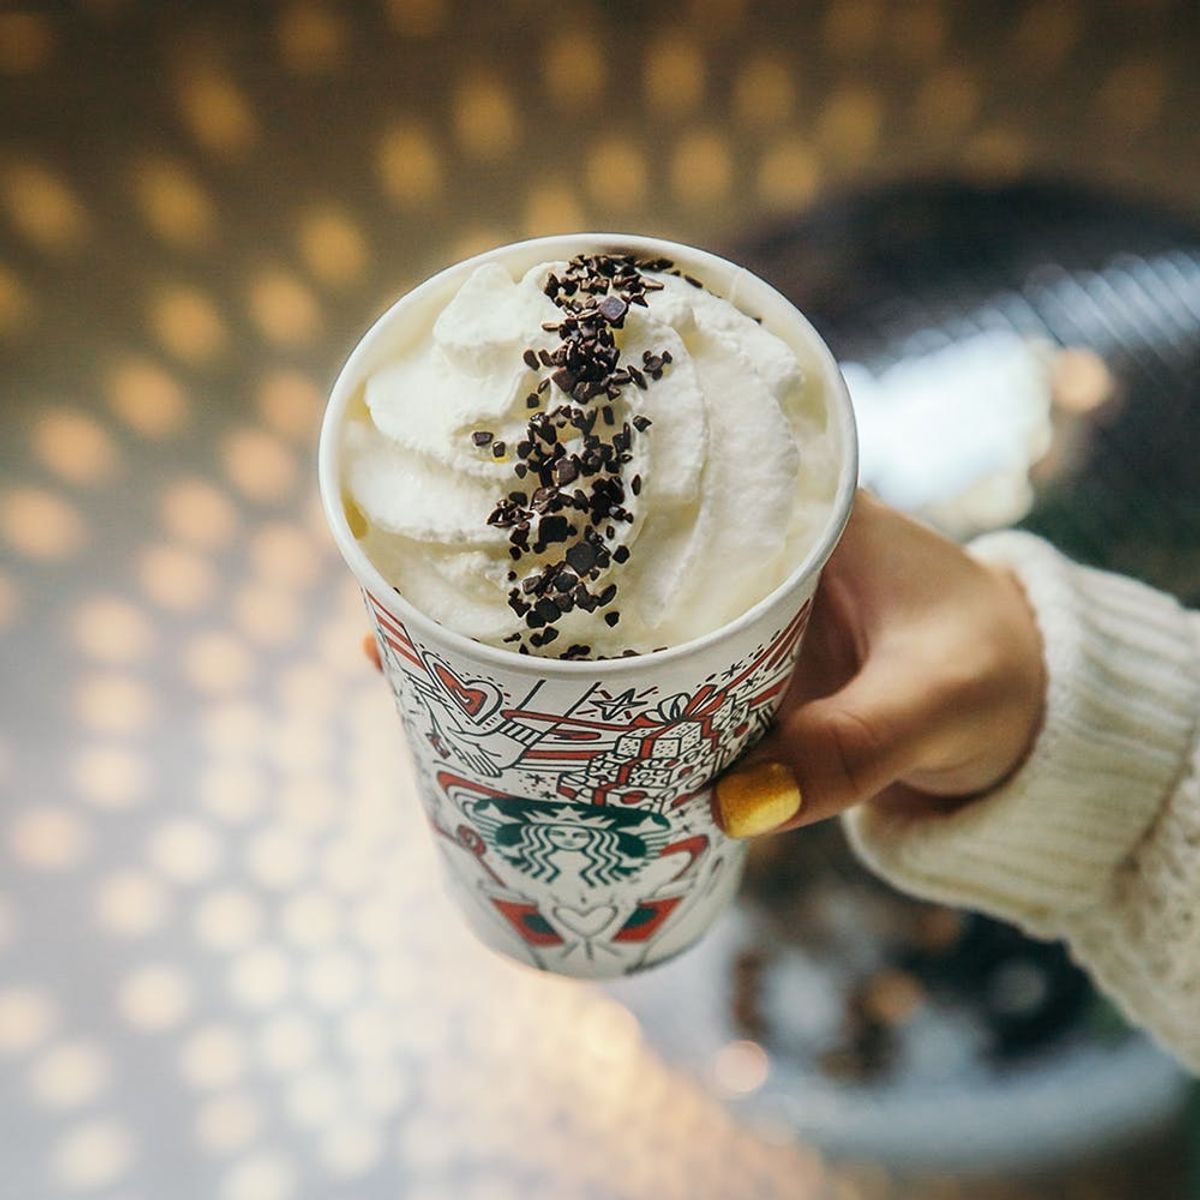 Starbucks Has 3 New Beverages to Help You Ring in the New Year